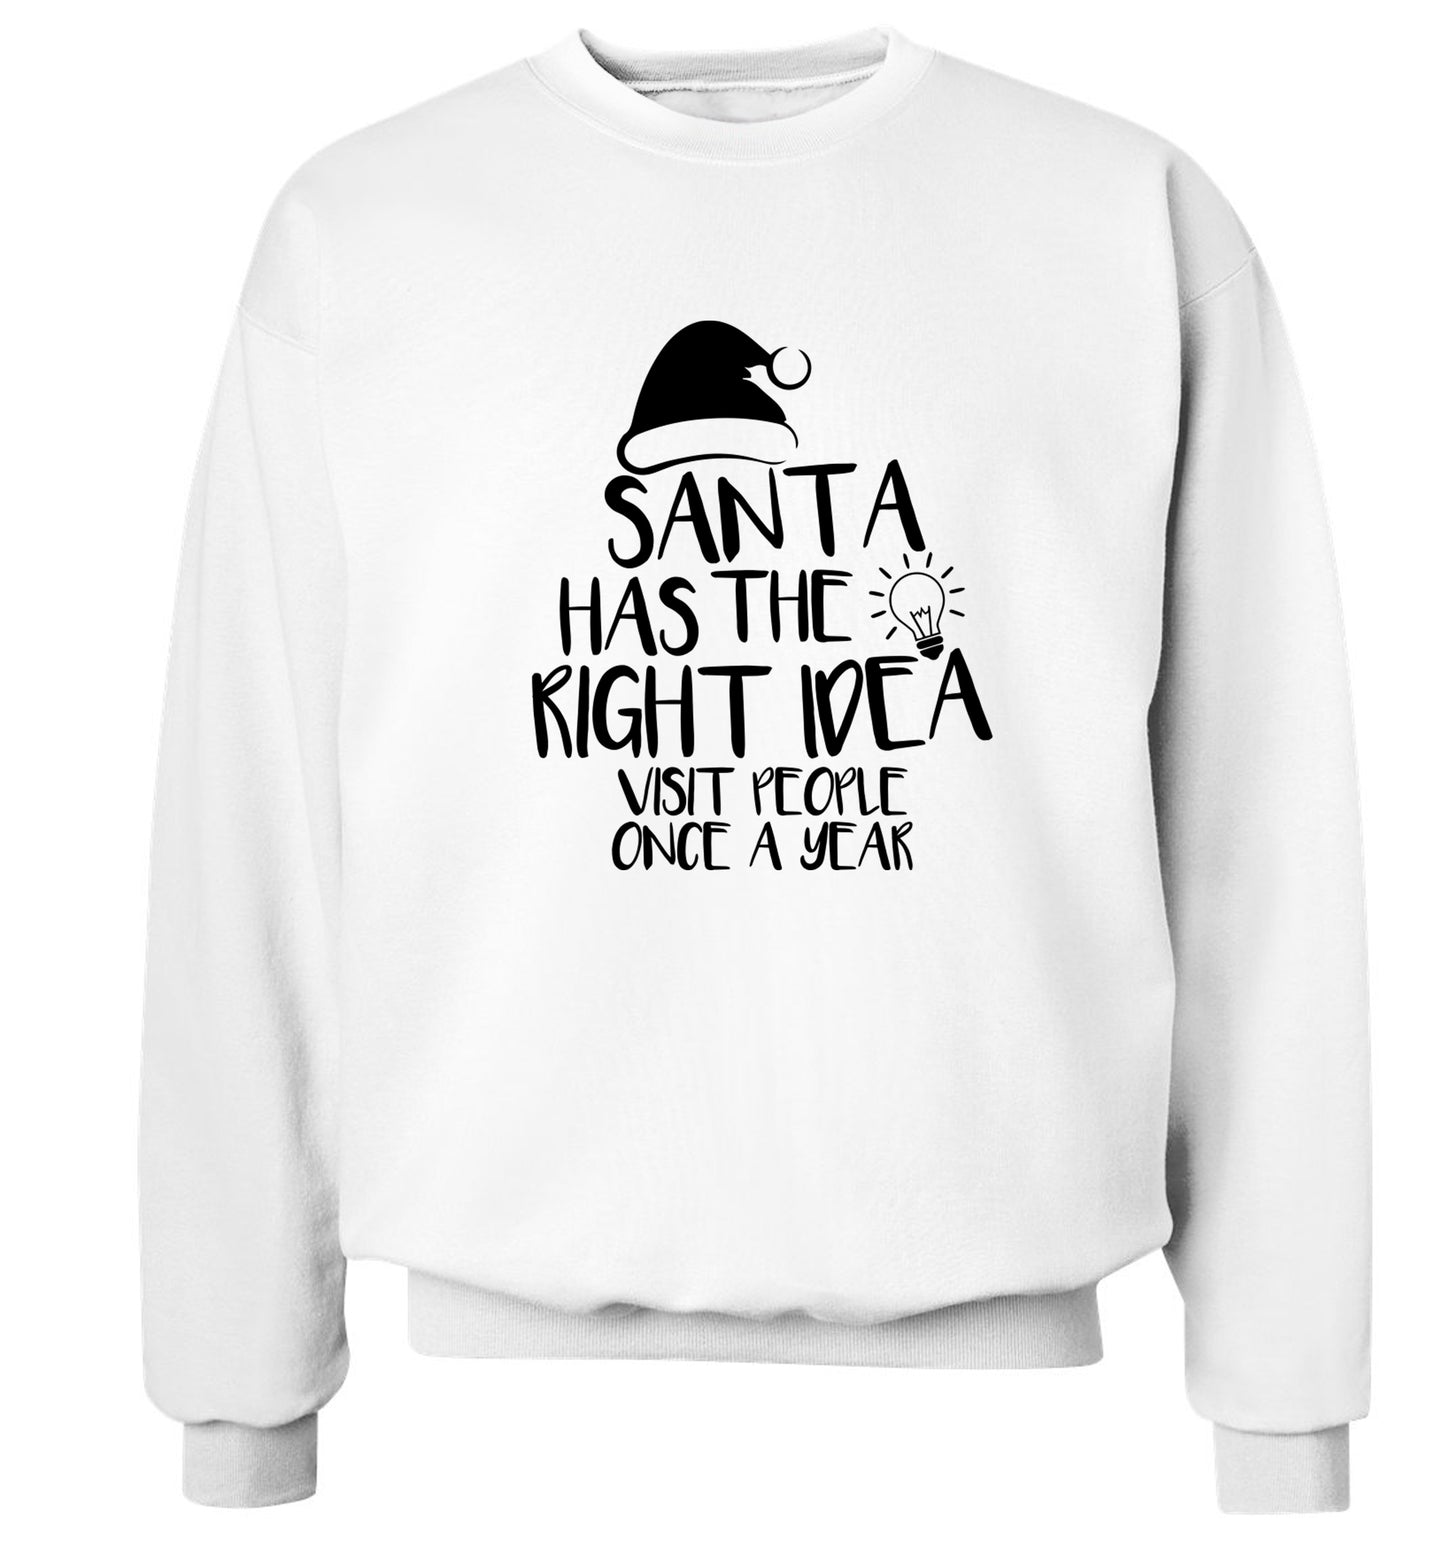 Santa has the right idea visit people once a year Adult's unisex white Sweater 2XL